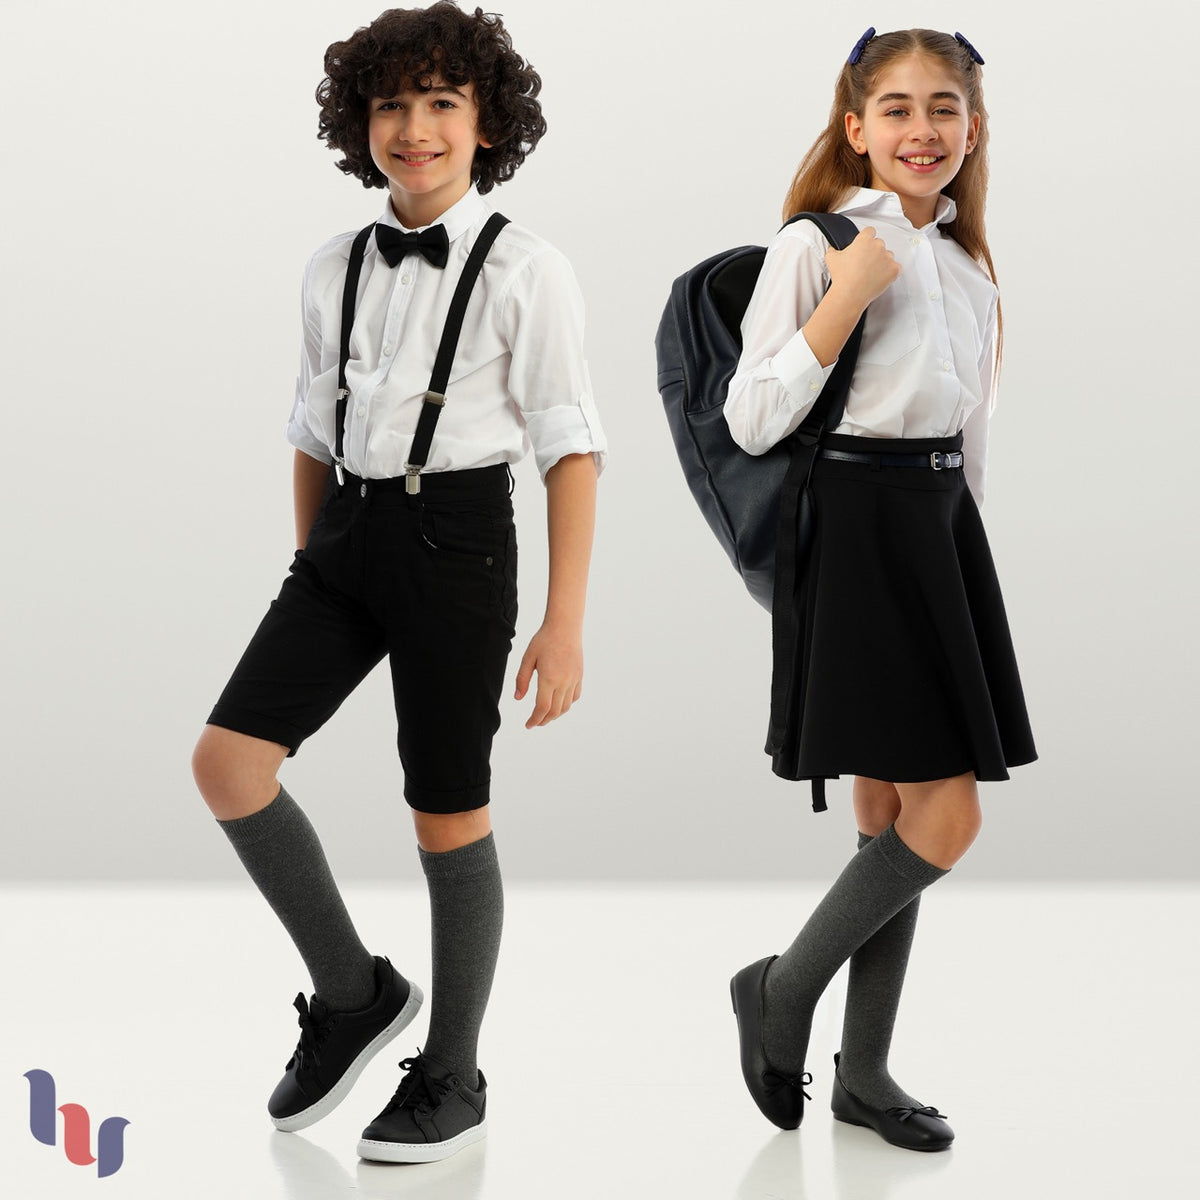 Two young students dressed in school uniforms and carrying backpacks, wearing Kids' Cotton Knee-High socks.